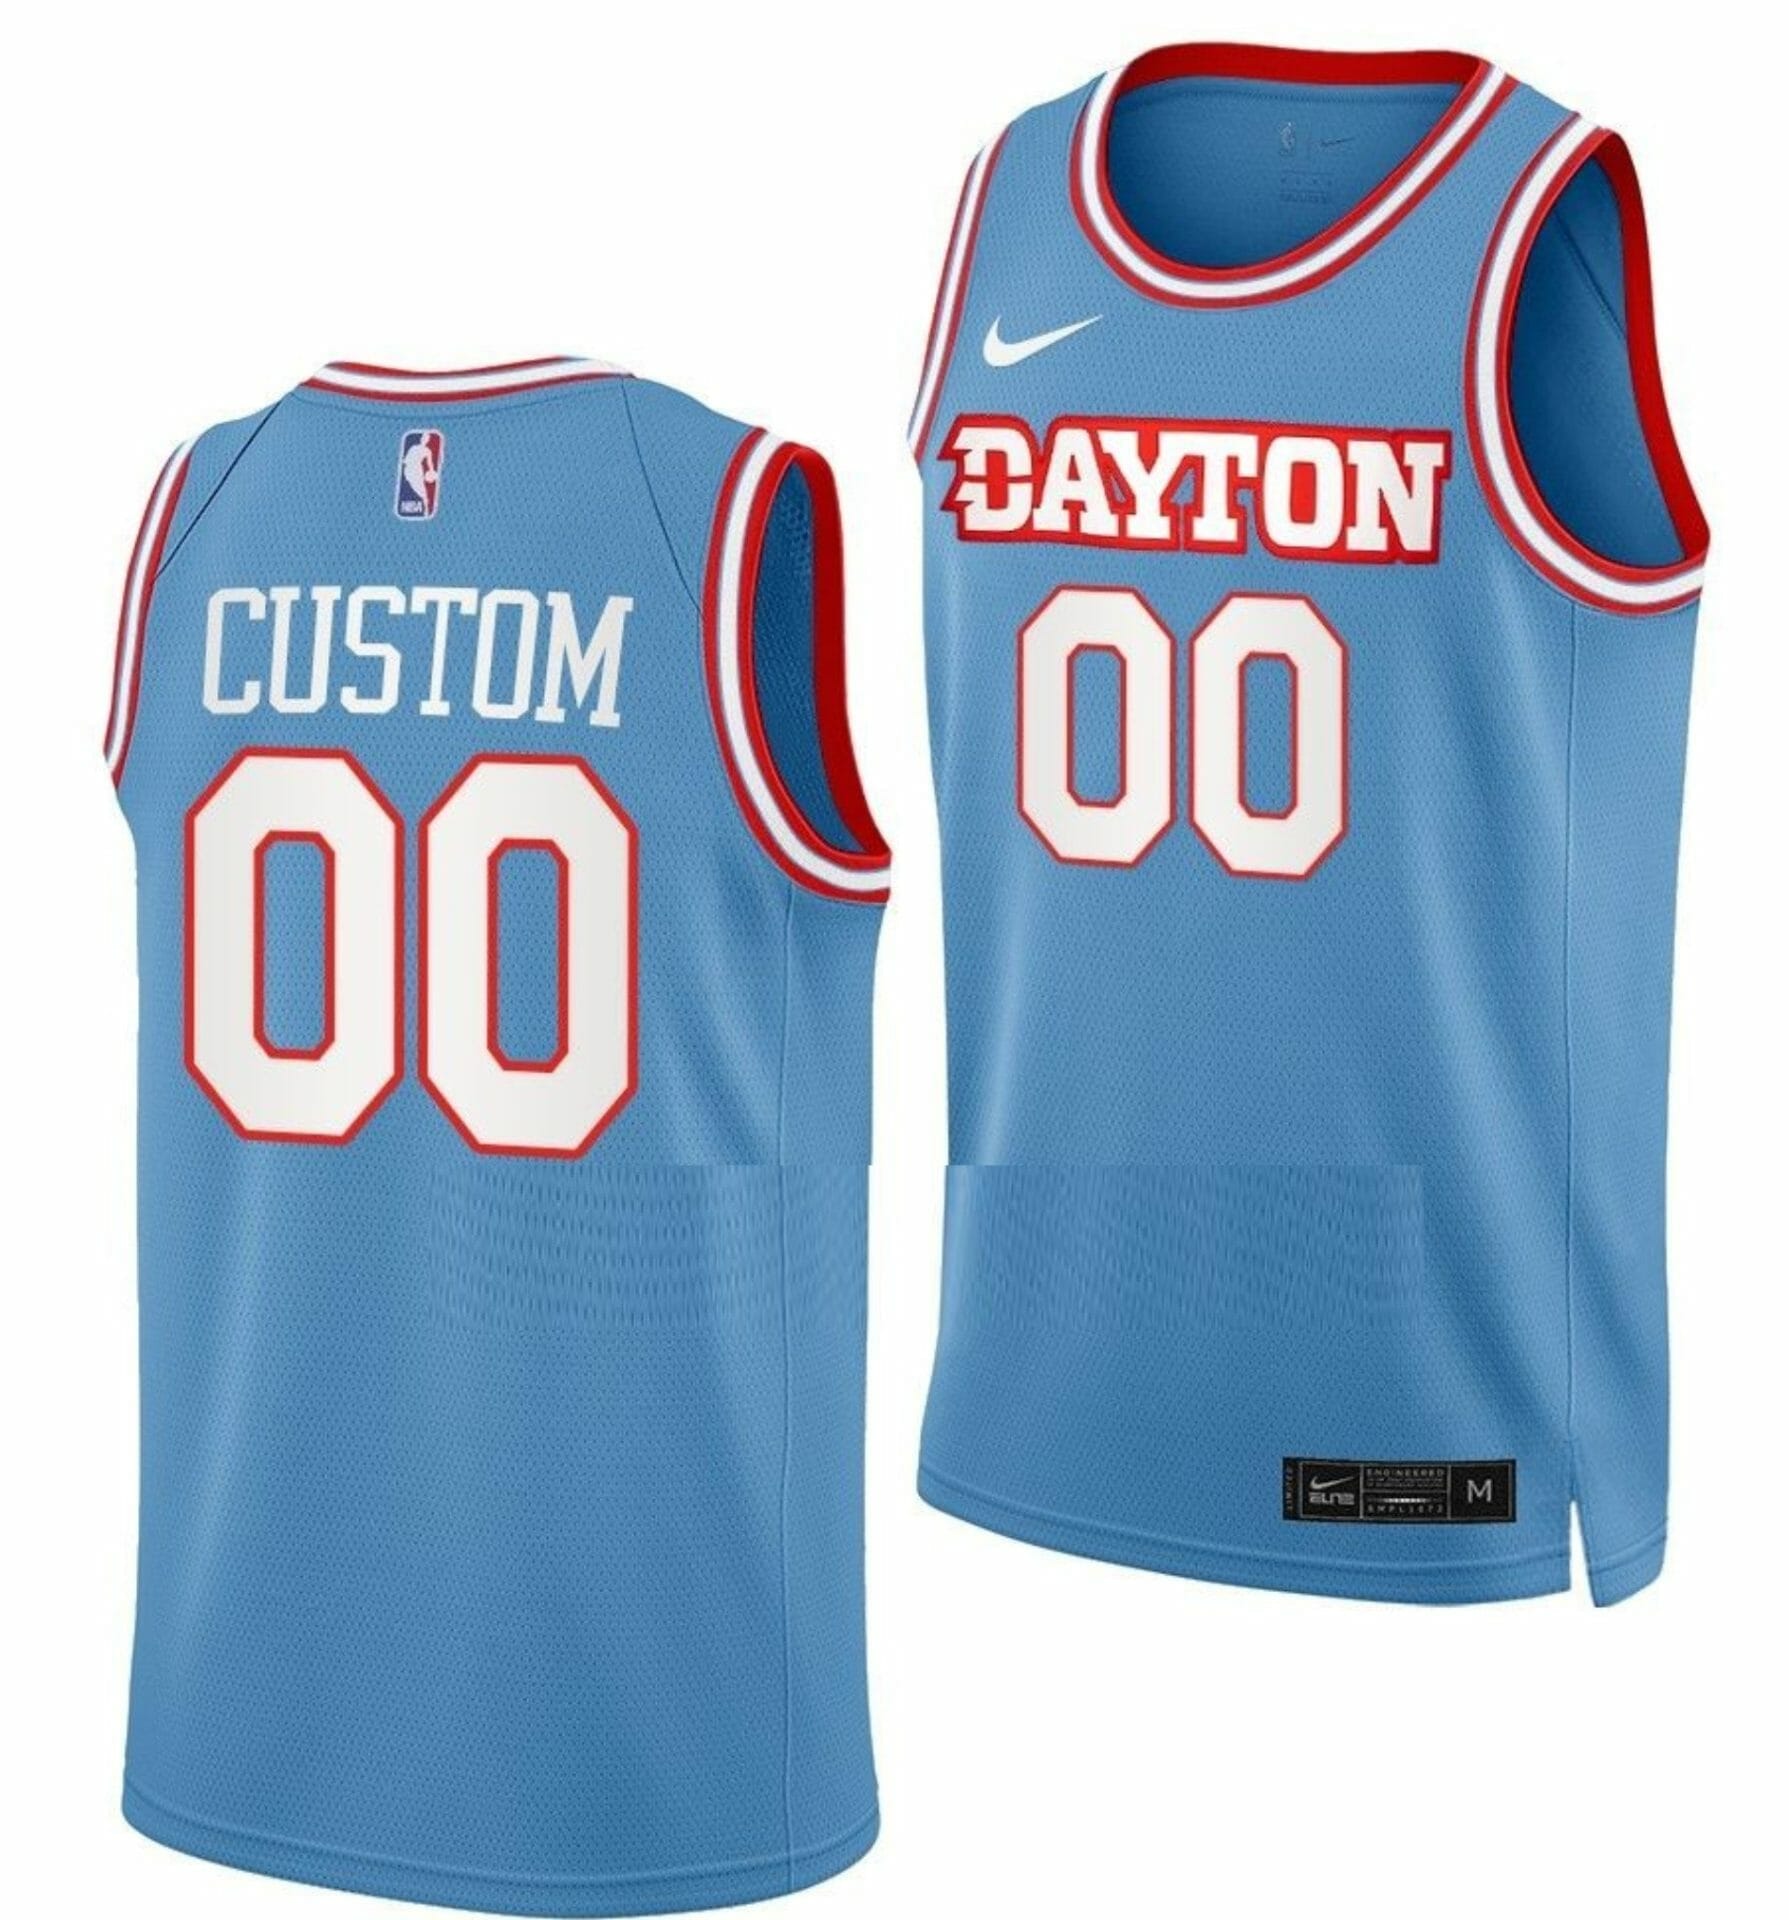 Custom College Basketball Jerseys Dayton Flyers Jersey Name and Number White